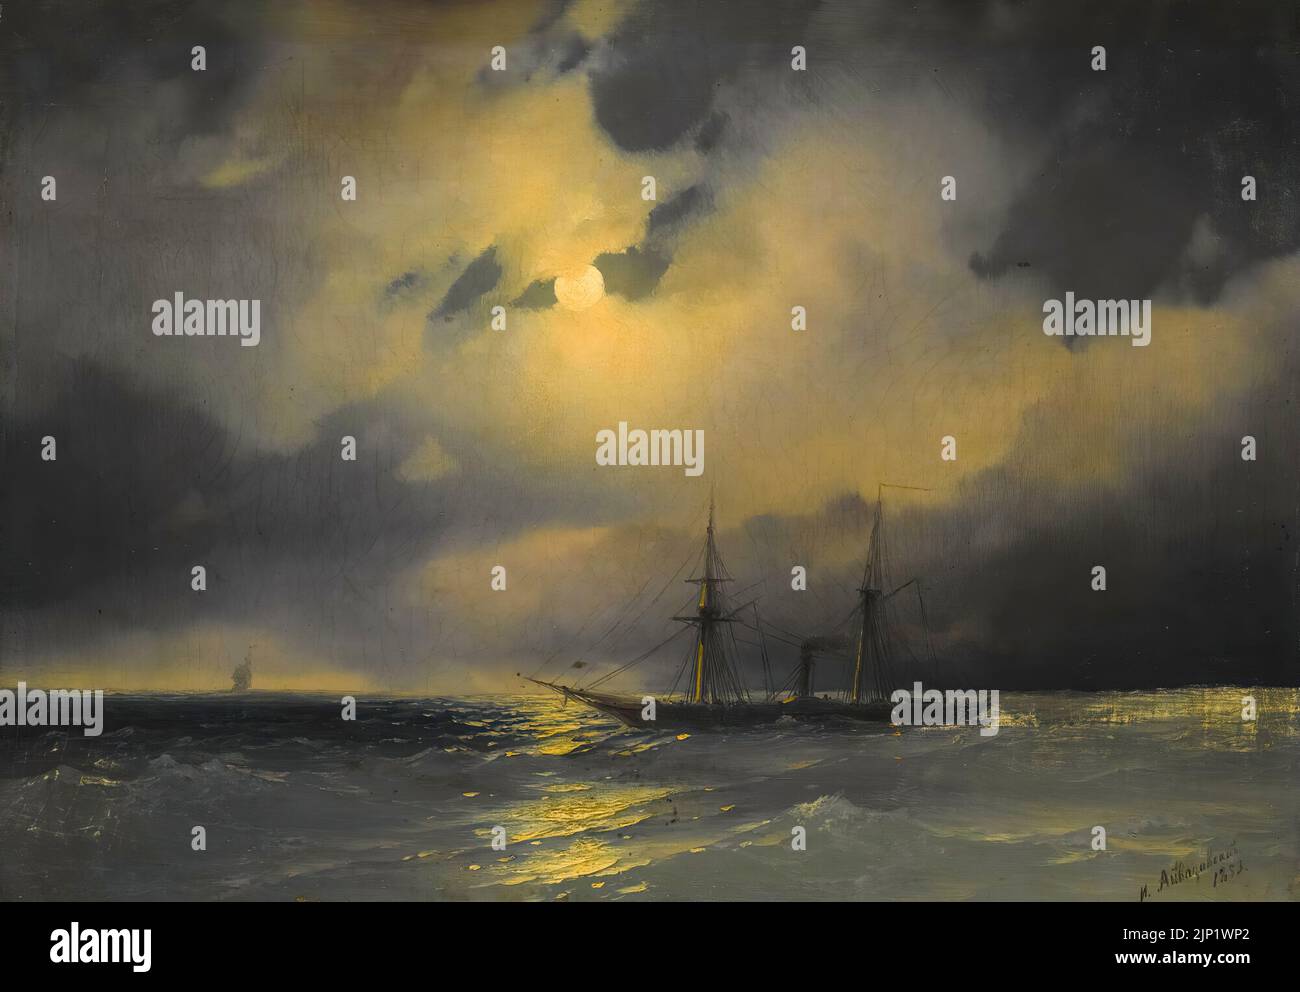 Ivan Aivazovsky, Shipping In Moonlight, painting in oil on canvas, 1853 Stock Photo